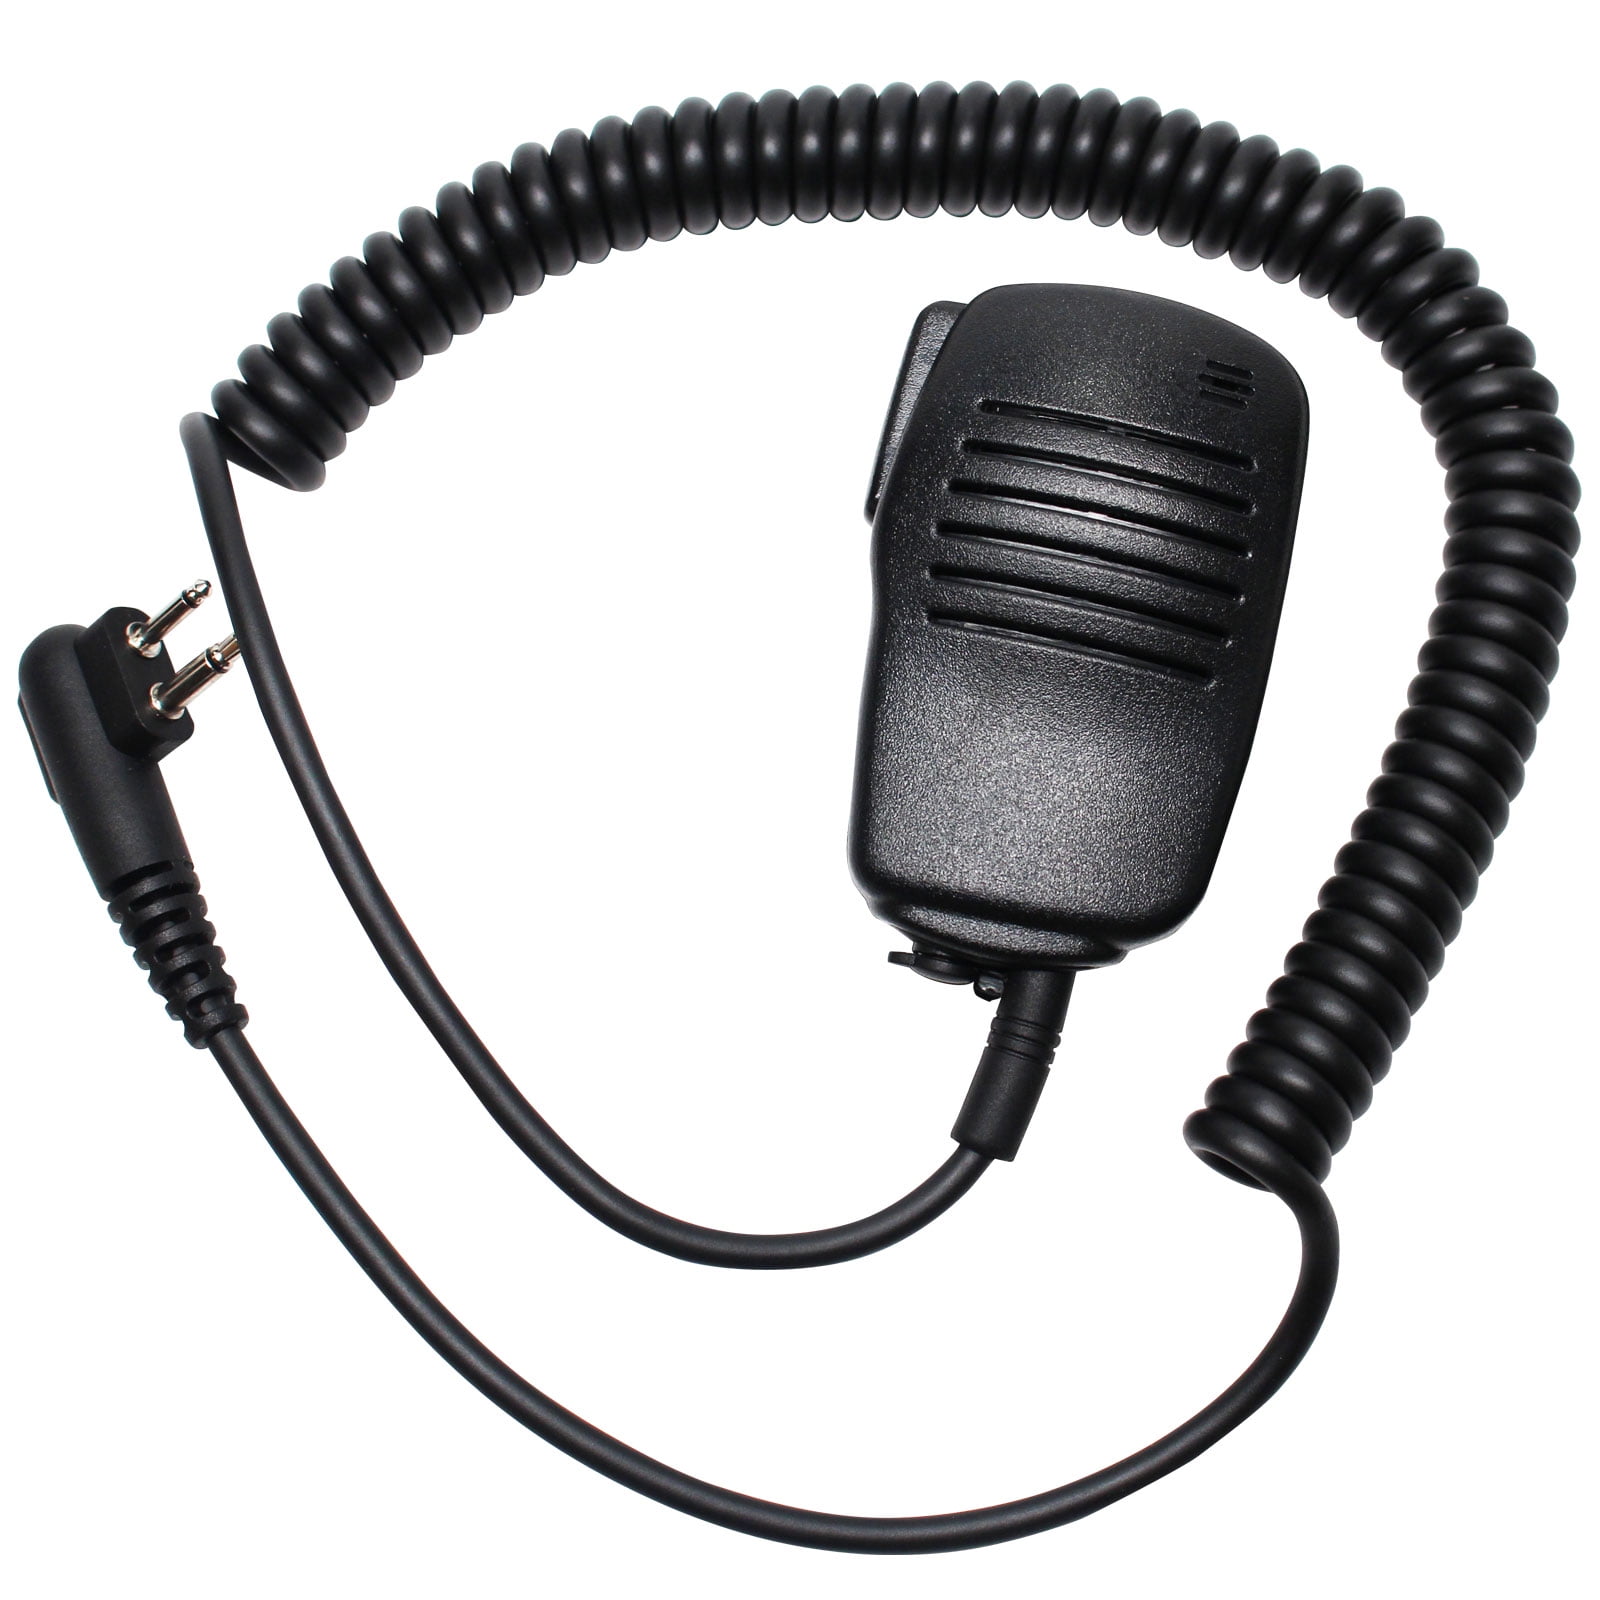 FYL Speaker Microphone PTT 2-Prong Connector for MOTOROLA Portable Two-Way Radio